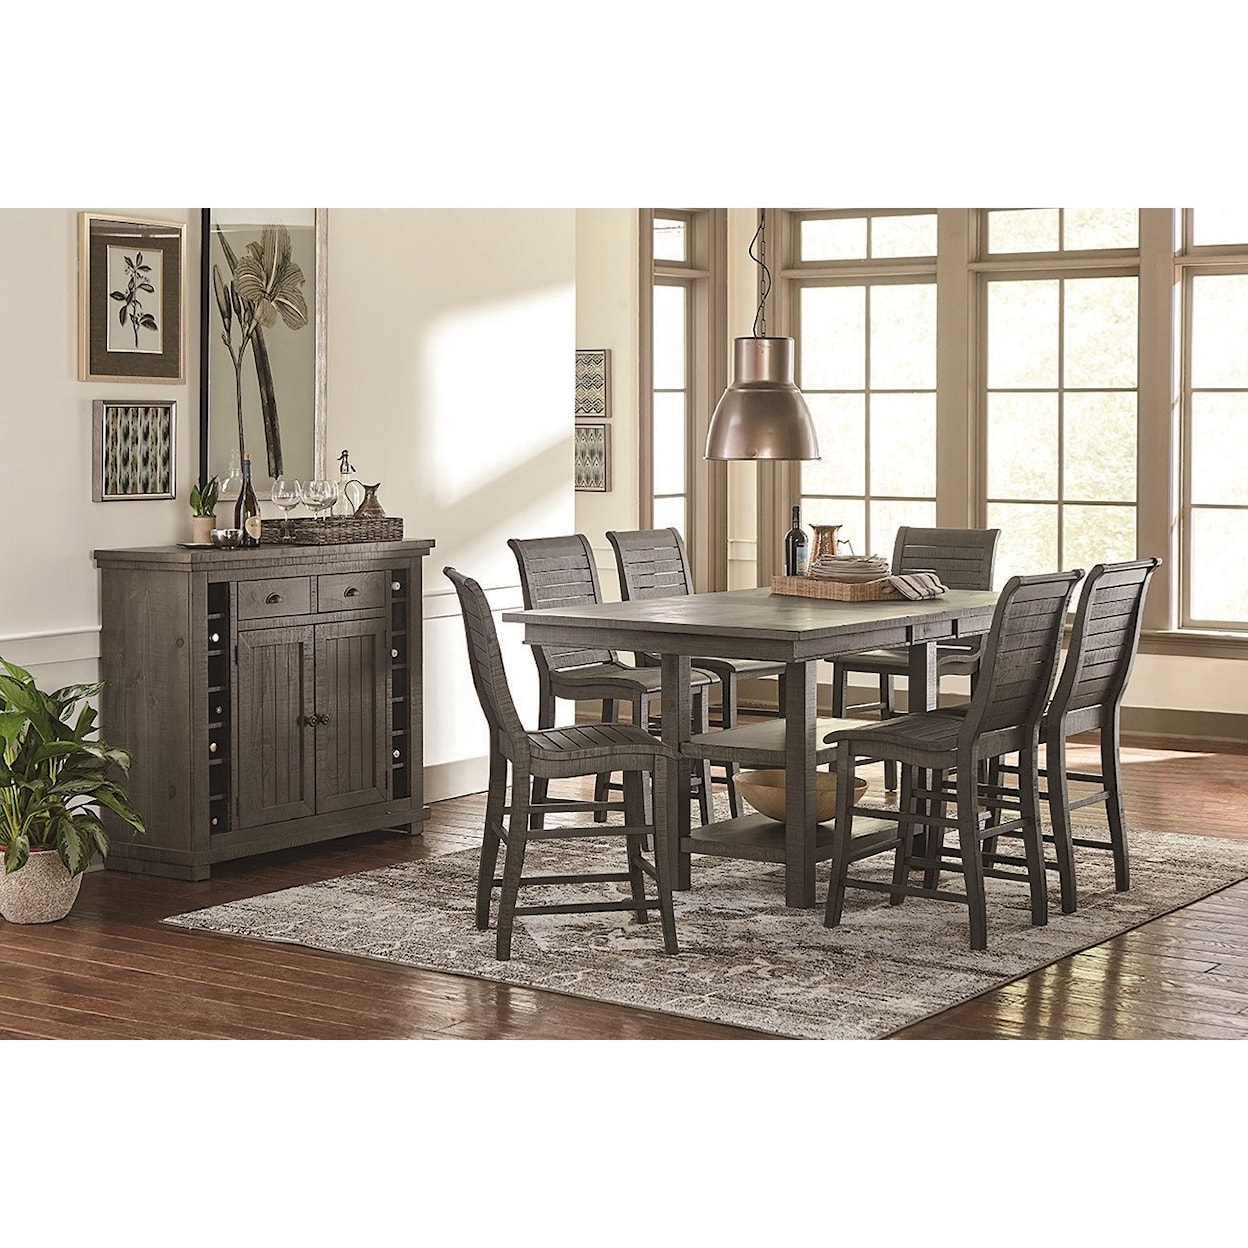 Progressive Furniture Willow Dining Counter Chair